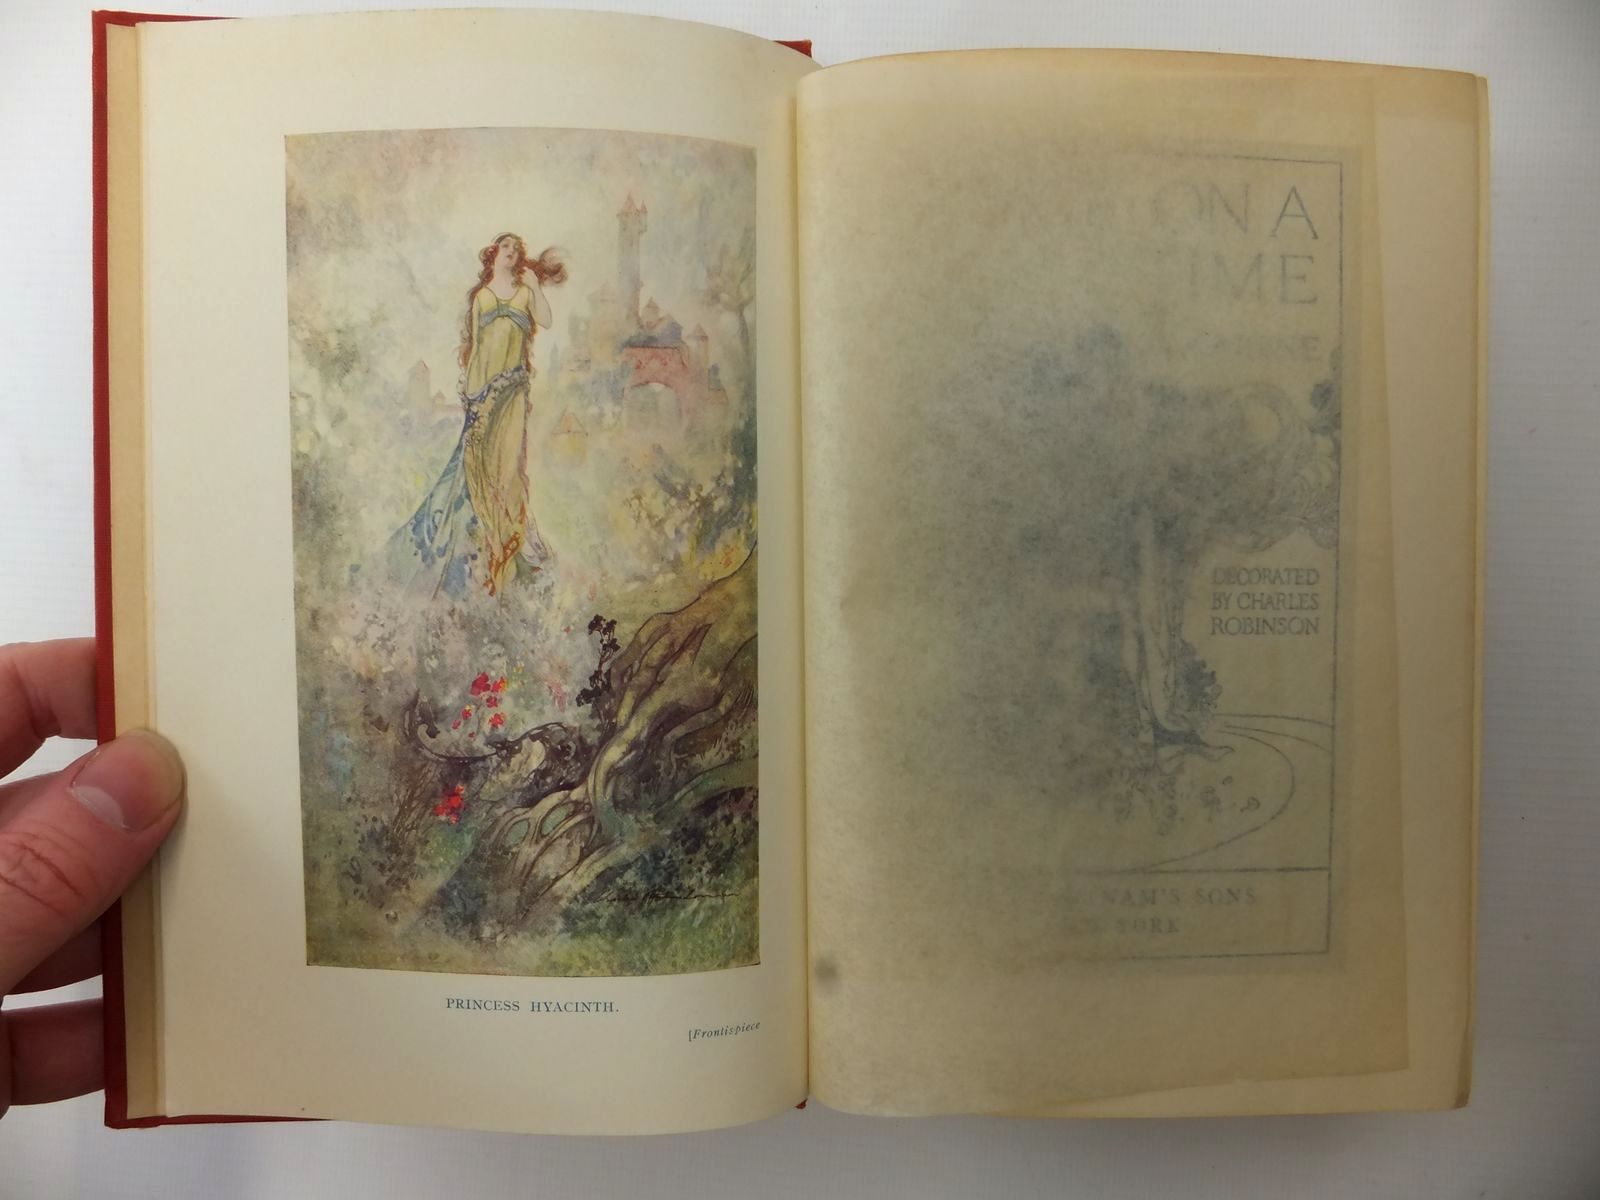 Photo of ONCE ON A TIME written by Milne, A.A. illustrated by Robinson, Charles published by G.P. Putnam's Sons (STOCK CODE: 2122555)  for sale by Stella & Rose's Books